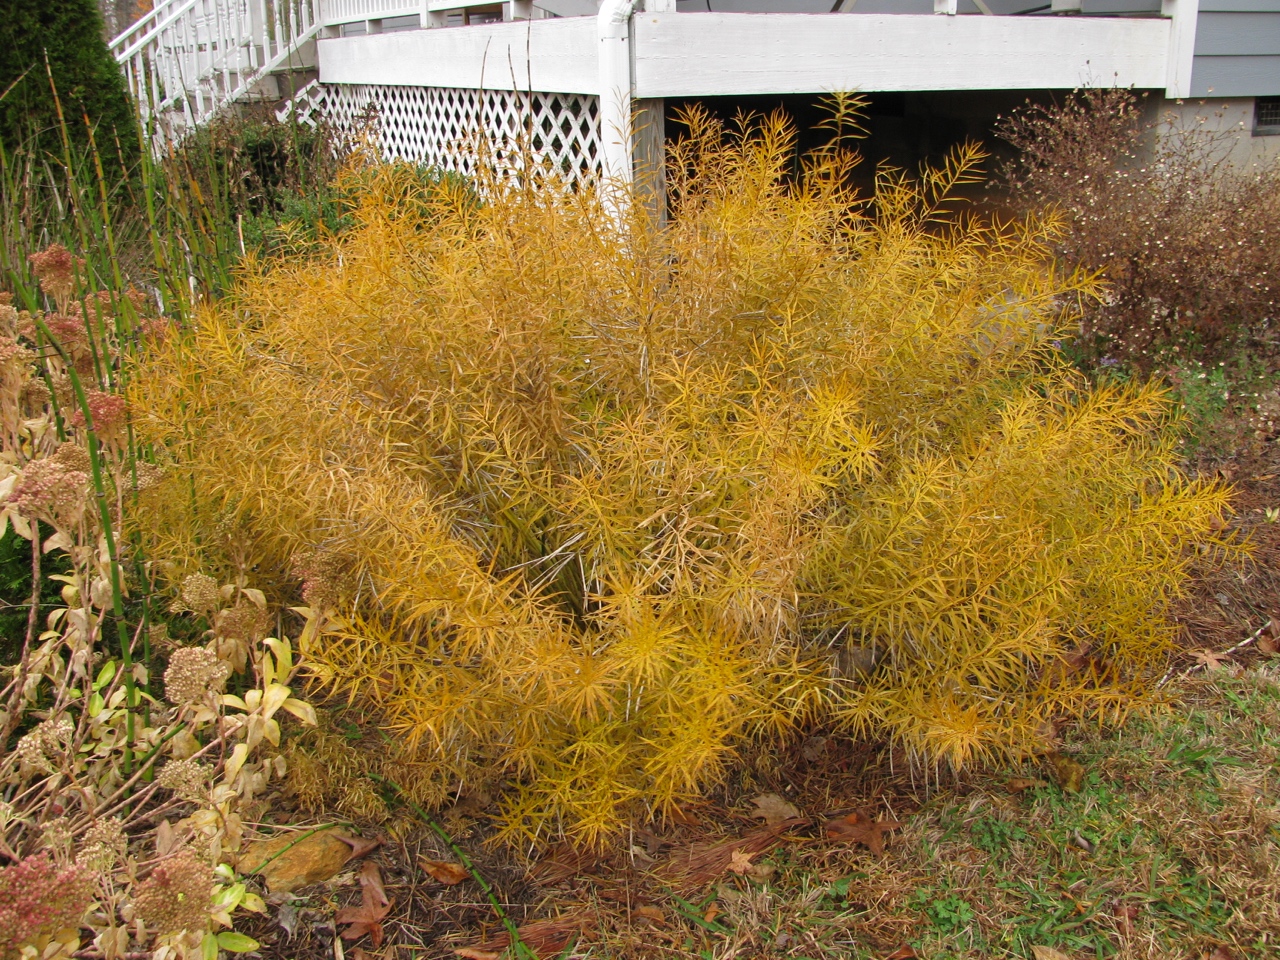 The Scientific Name is Amsonia hubrichtii. You will likely hear them called Threadleaf Bluestar, Hubricht's Bluestar, Hubricht's Slimpod. This picture shows the Lovely Fall color in November of Amsonia hubrichtii